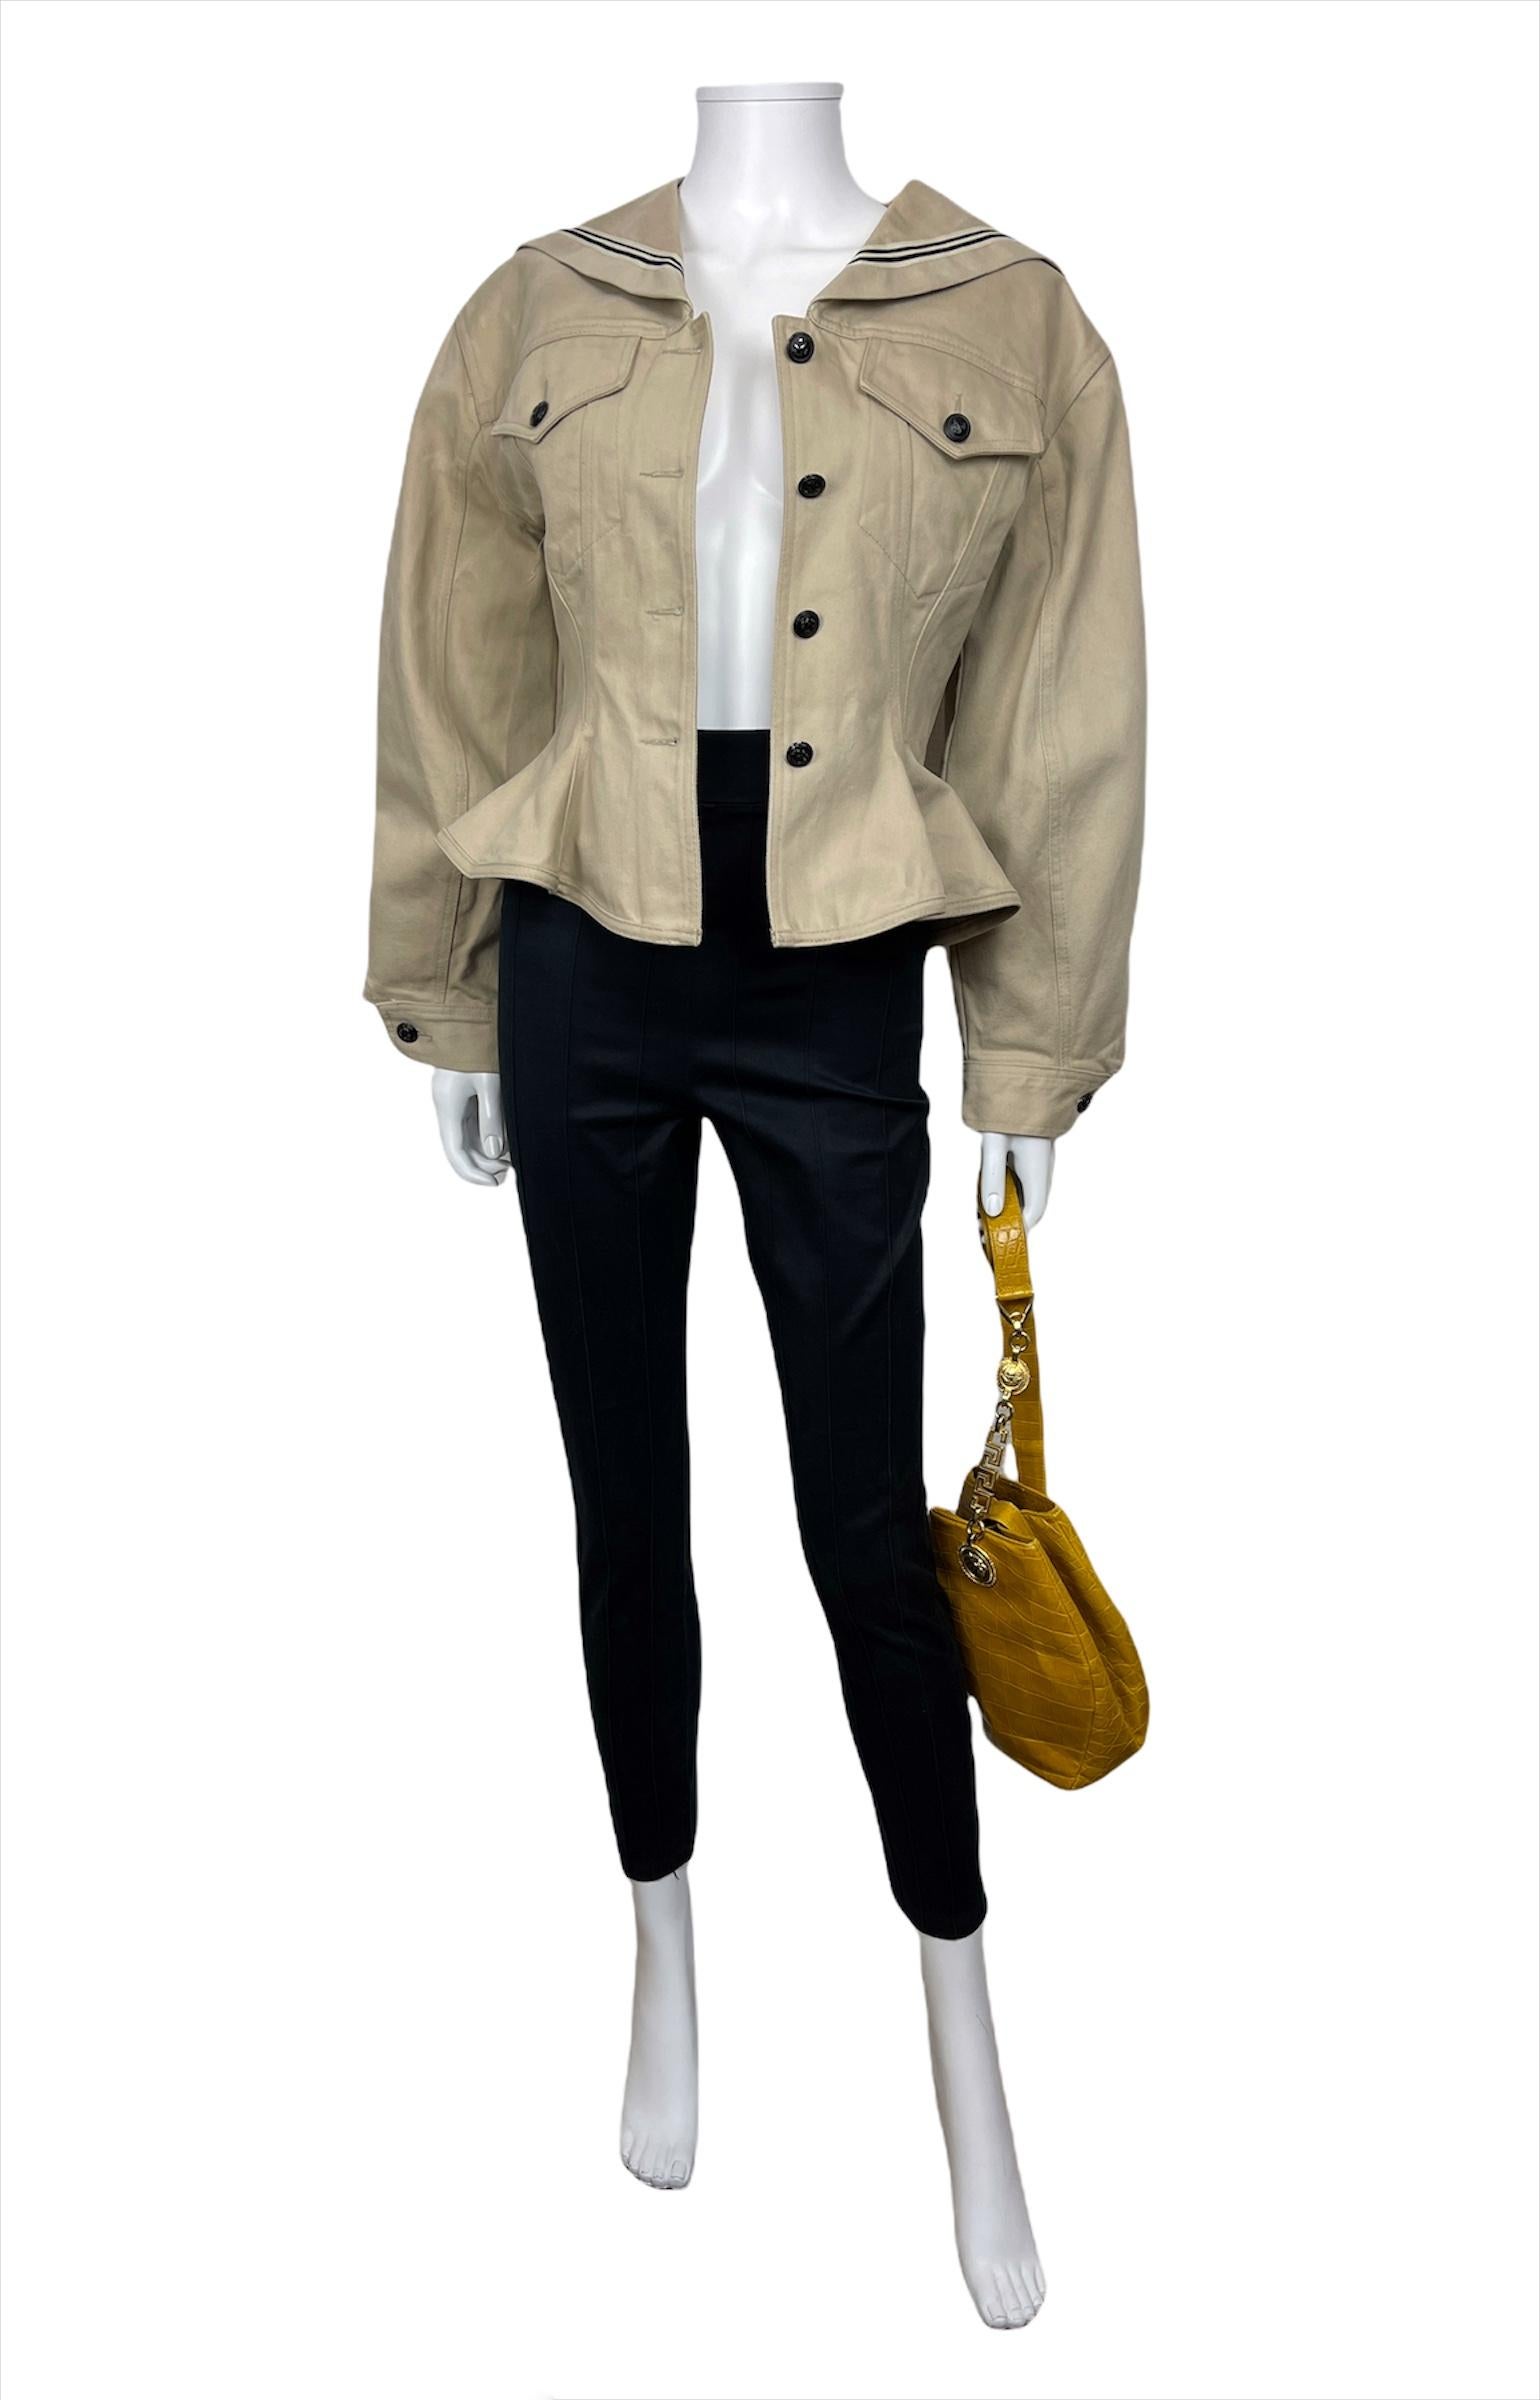 JUNIOR JEAN PAUL GAULTIER, Made in Italy, Spring-Summer 1989.
This long-sleeves jacket designed in beige cotton canvas has been presented in Jean Paul Gaultier Spring-Summer 1989 runway named 